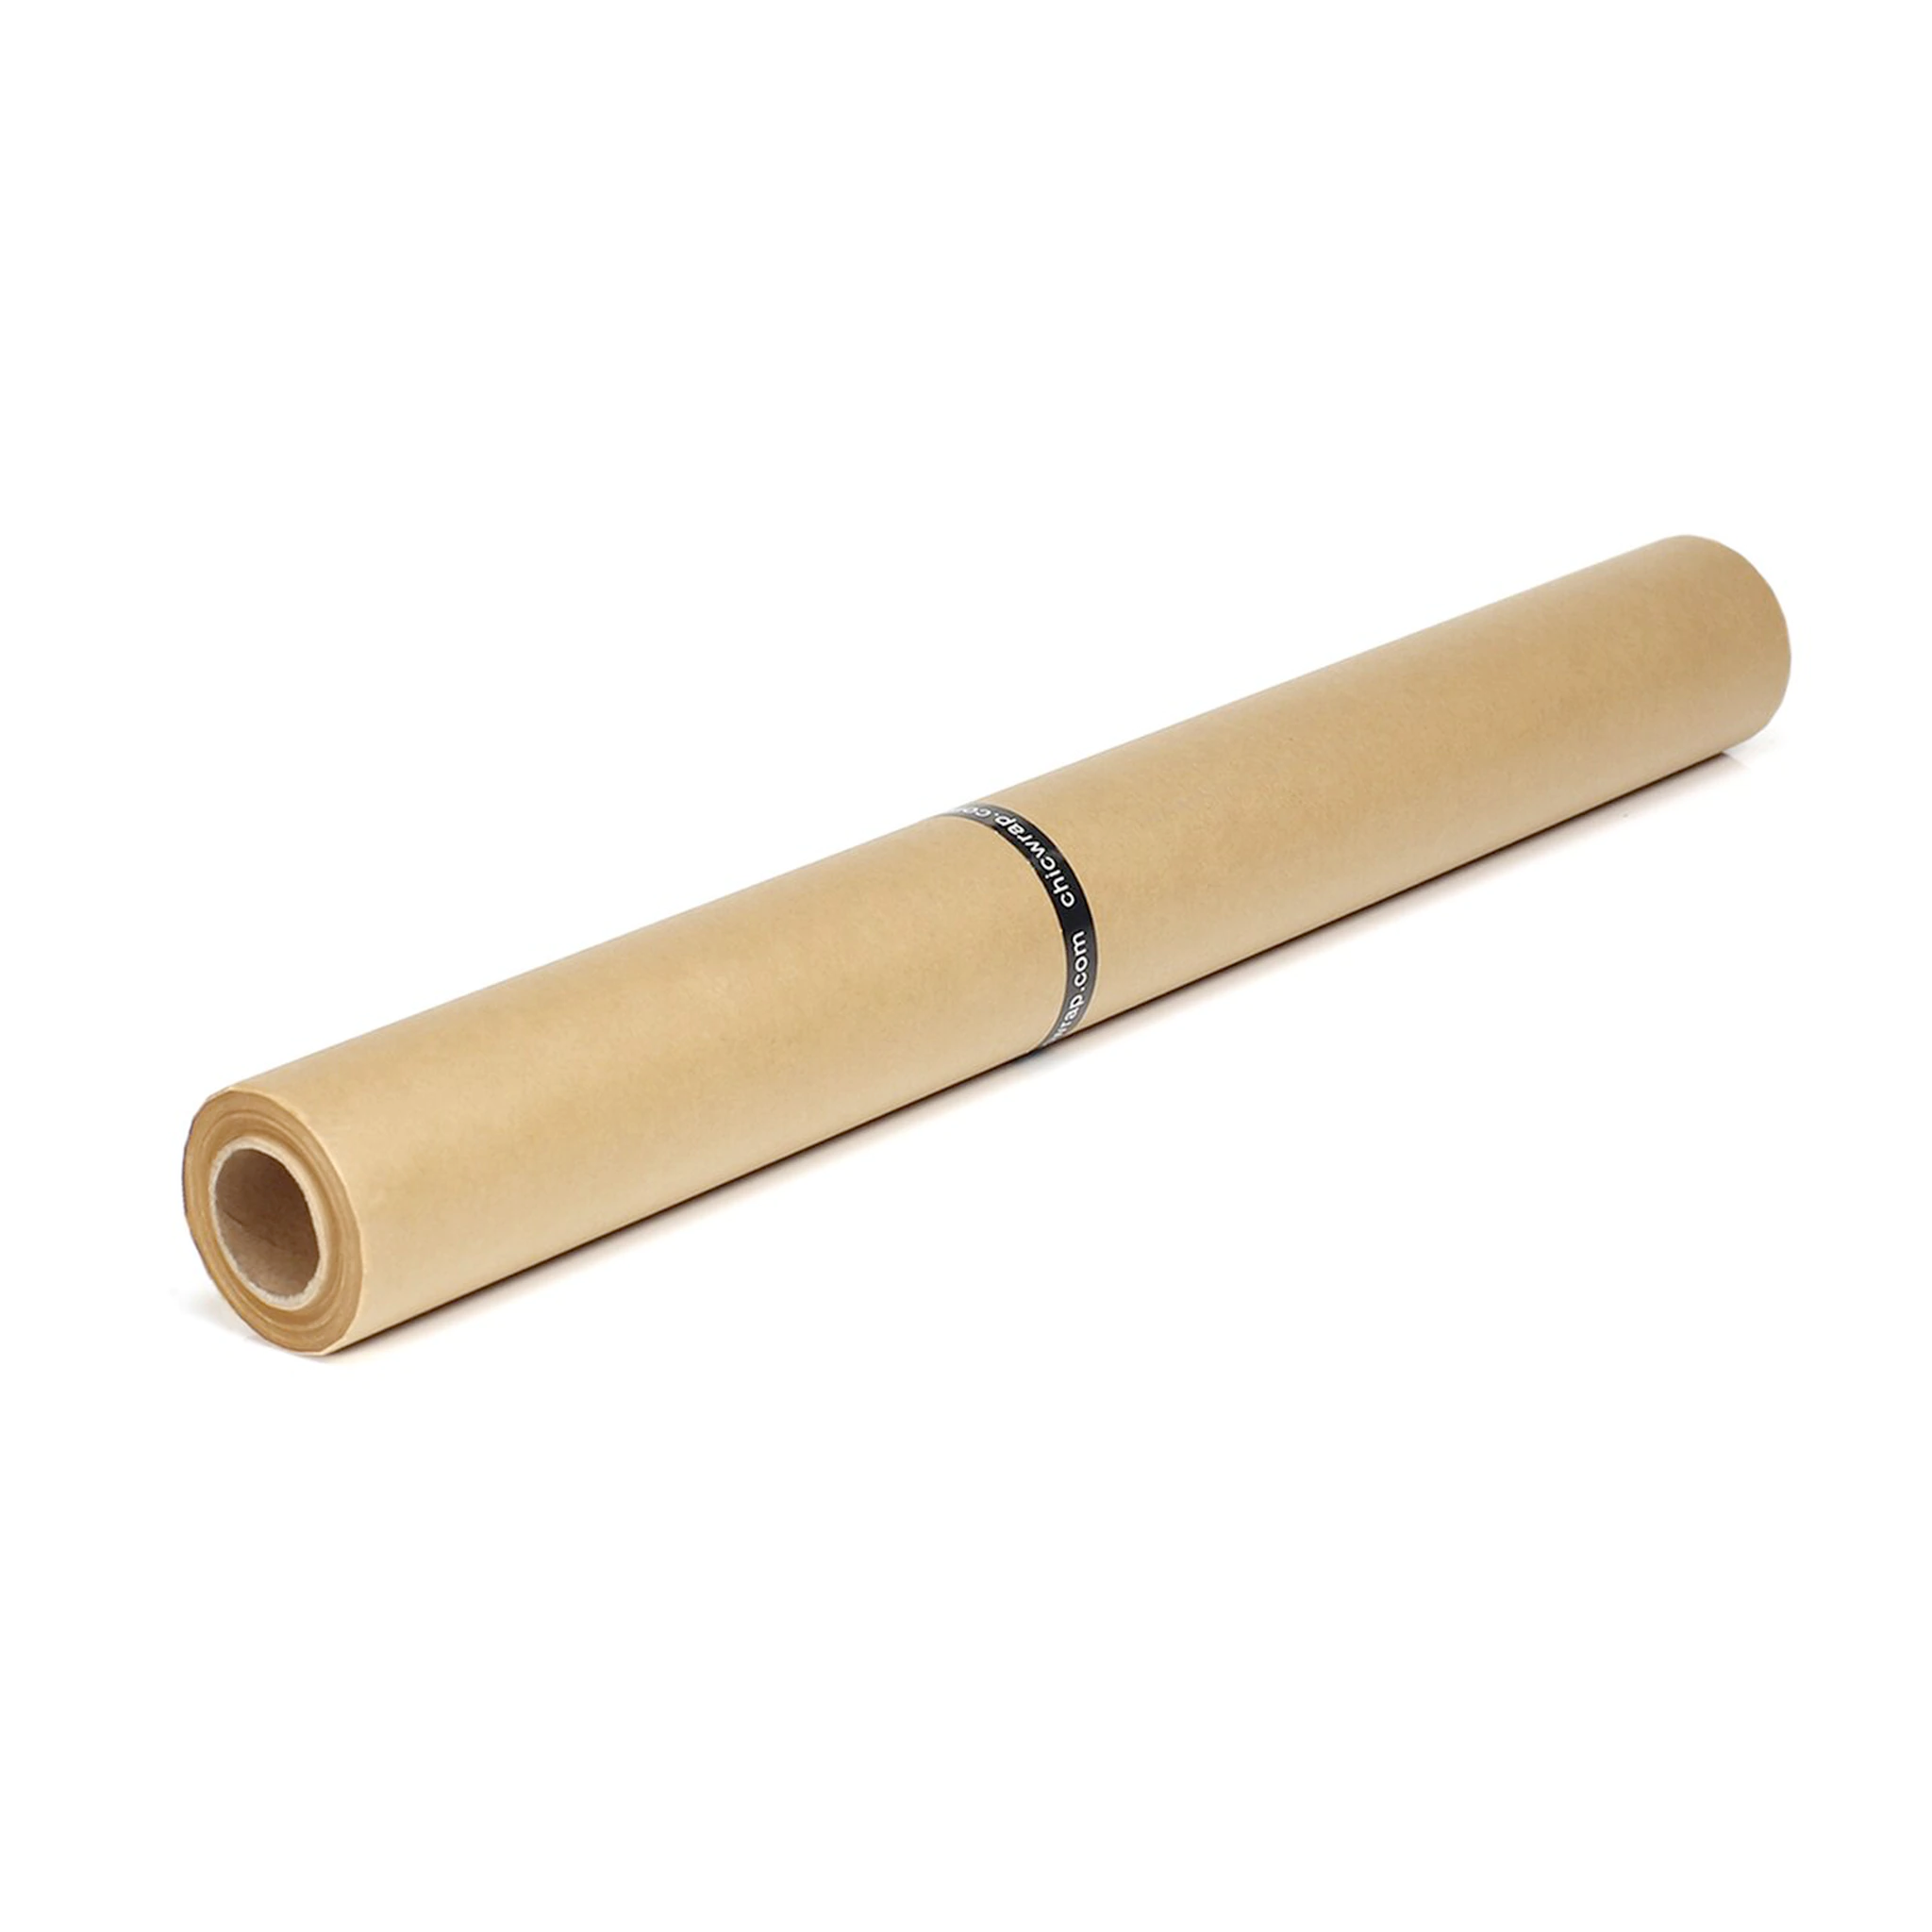 ChicWrap Parchment Paper 66' Refill Roll